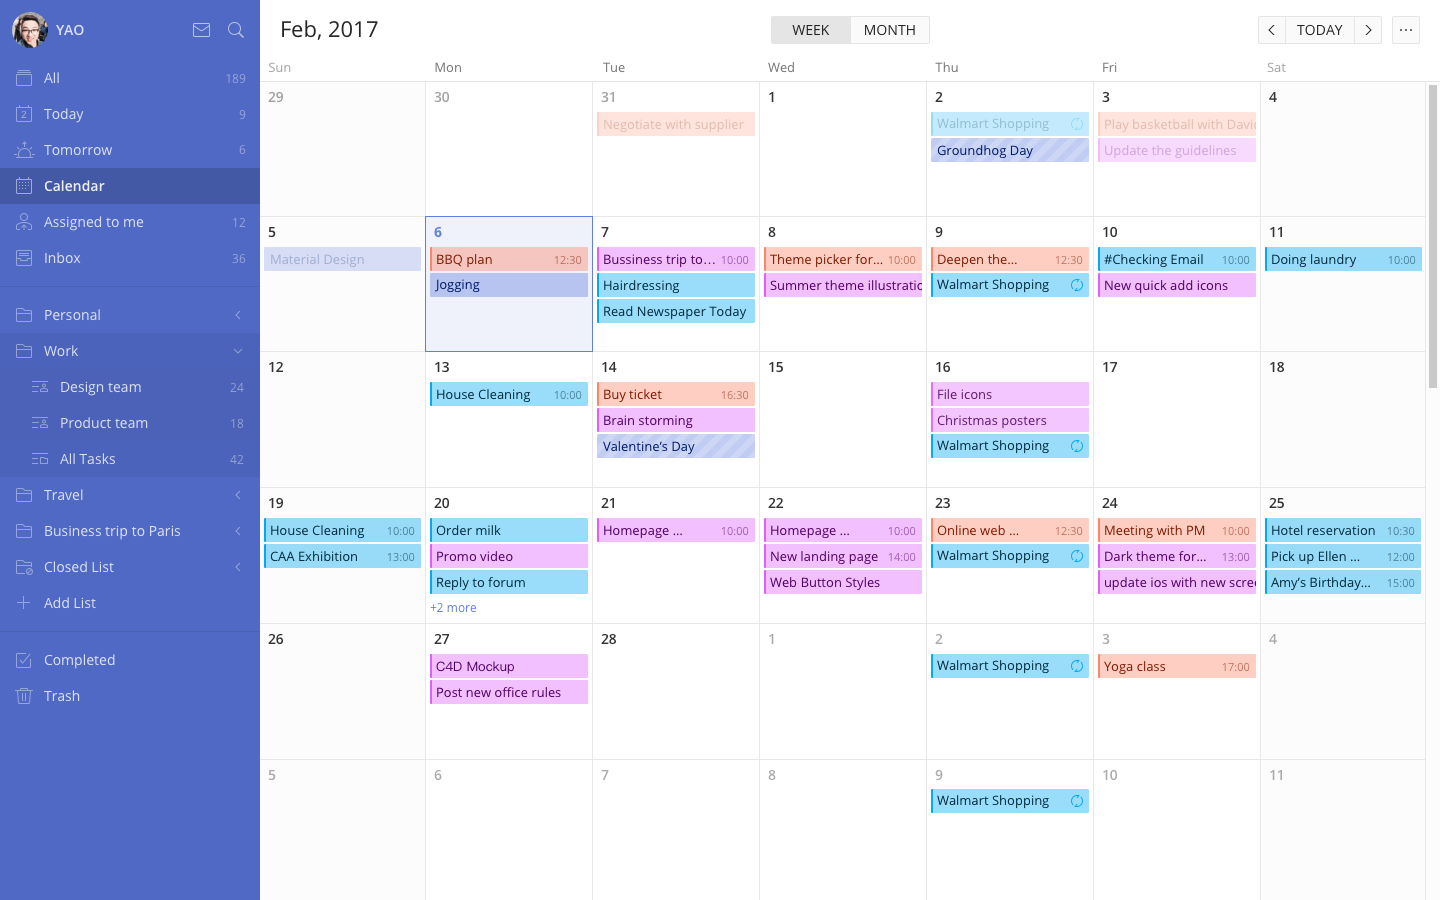 Dribbble calendar_view__month.png by YAO